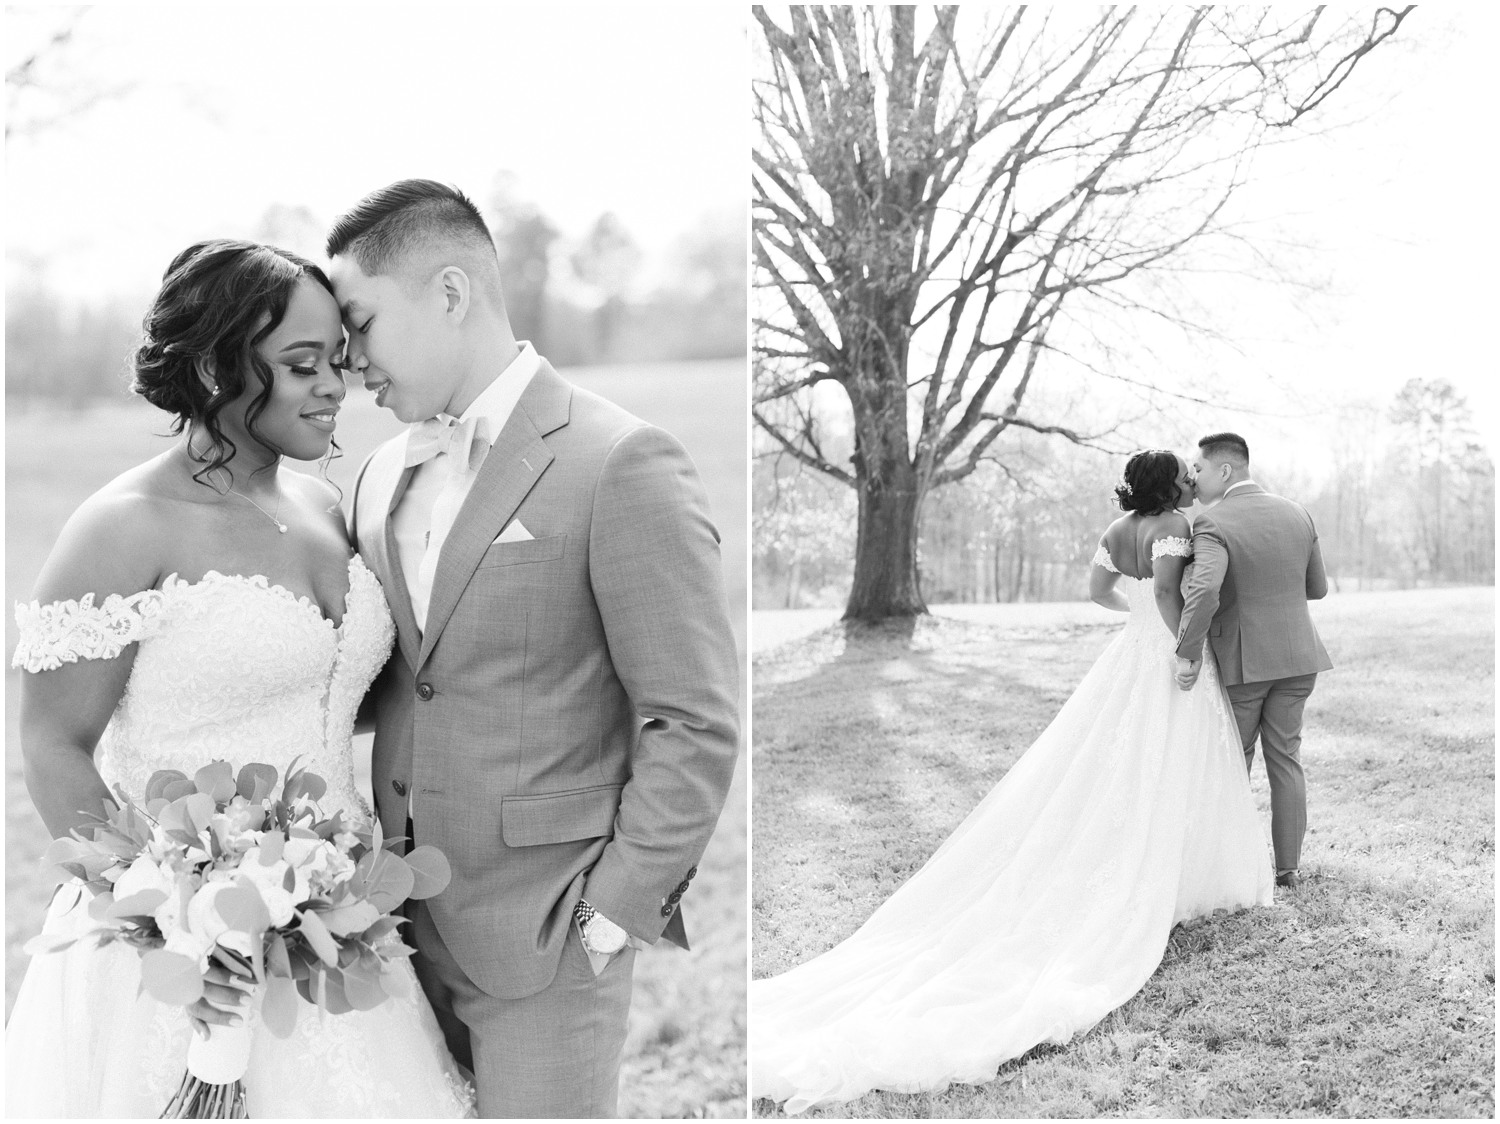 Classic portraits of a couple on their wedding day taken by Winston Salem Wedding Photographer Chelsea Renay